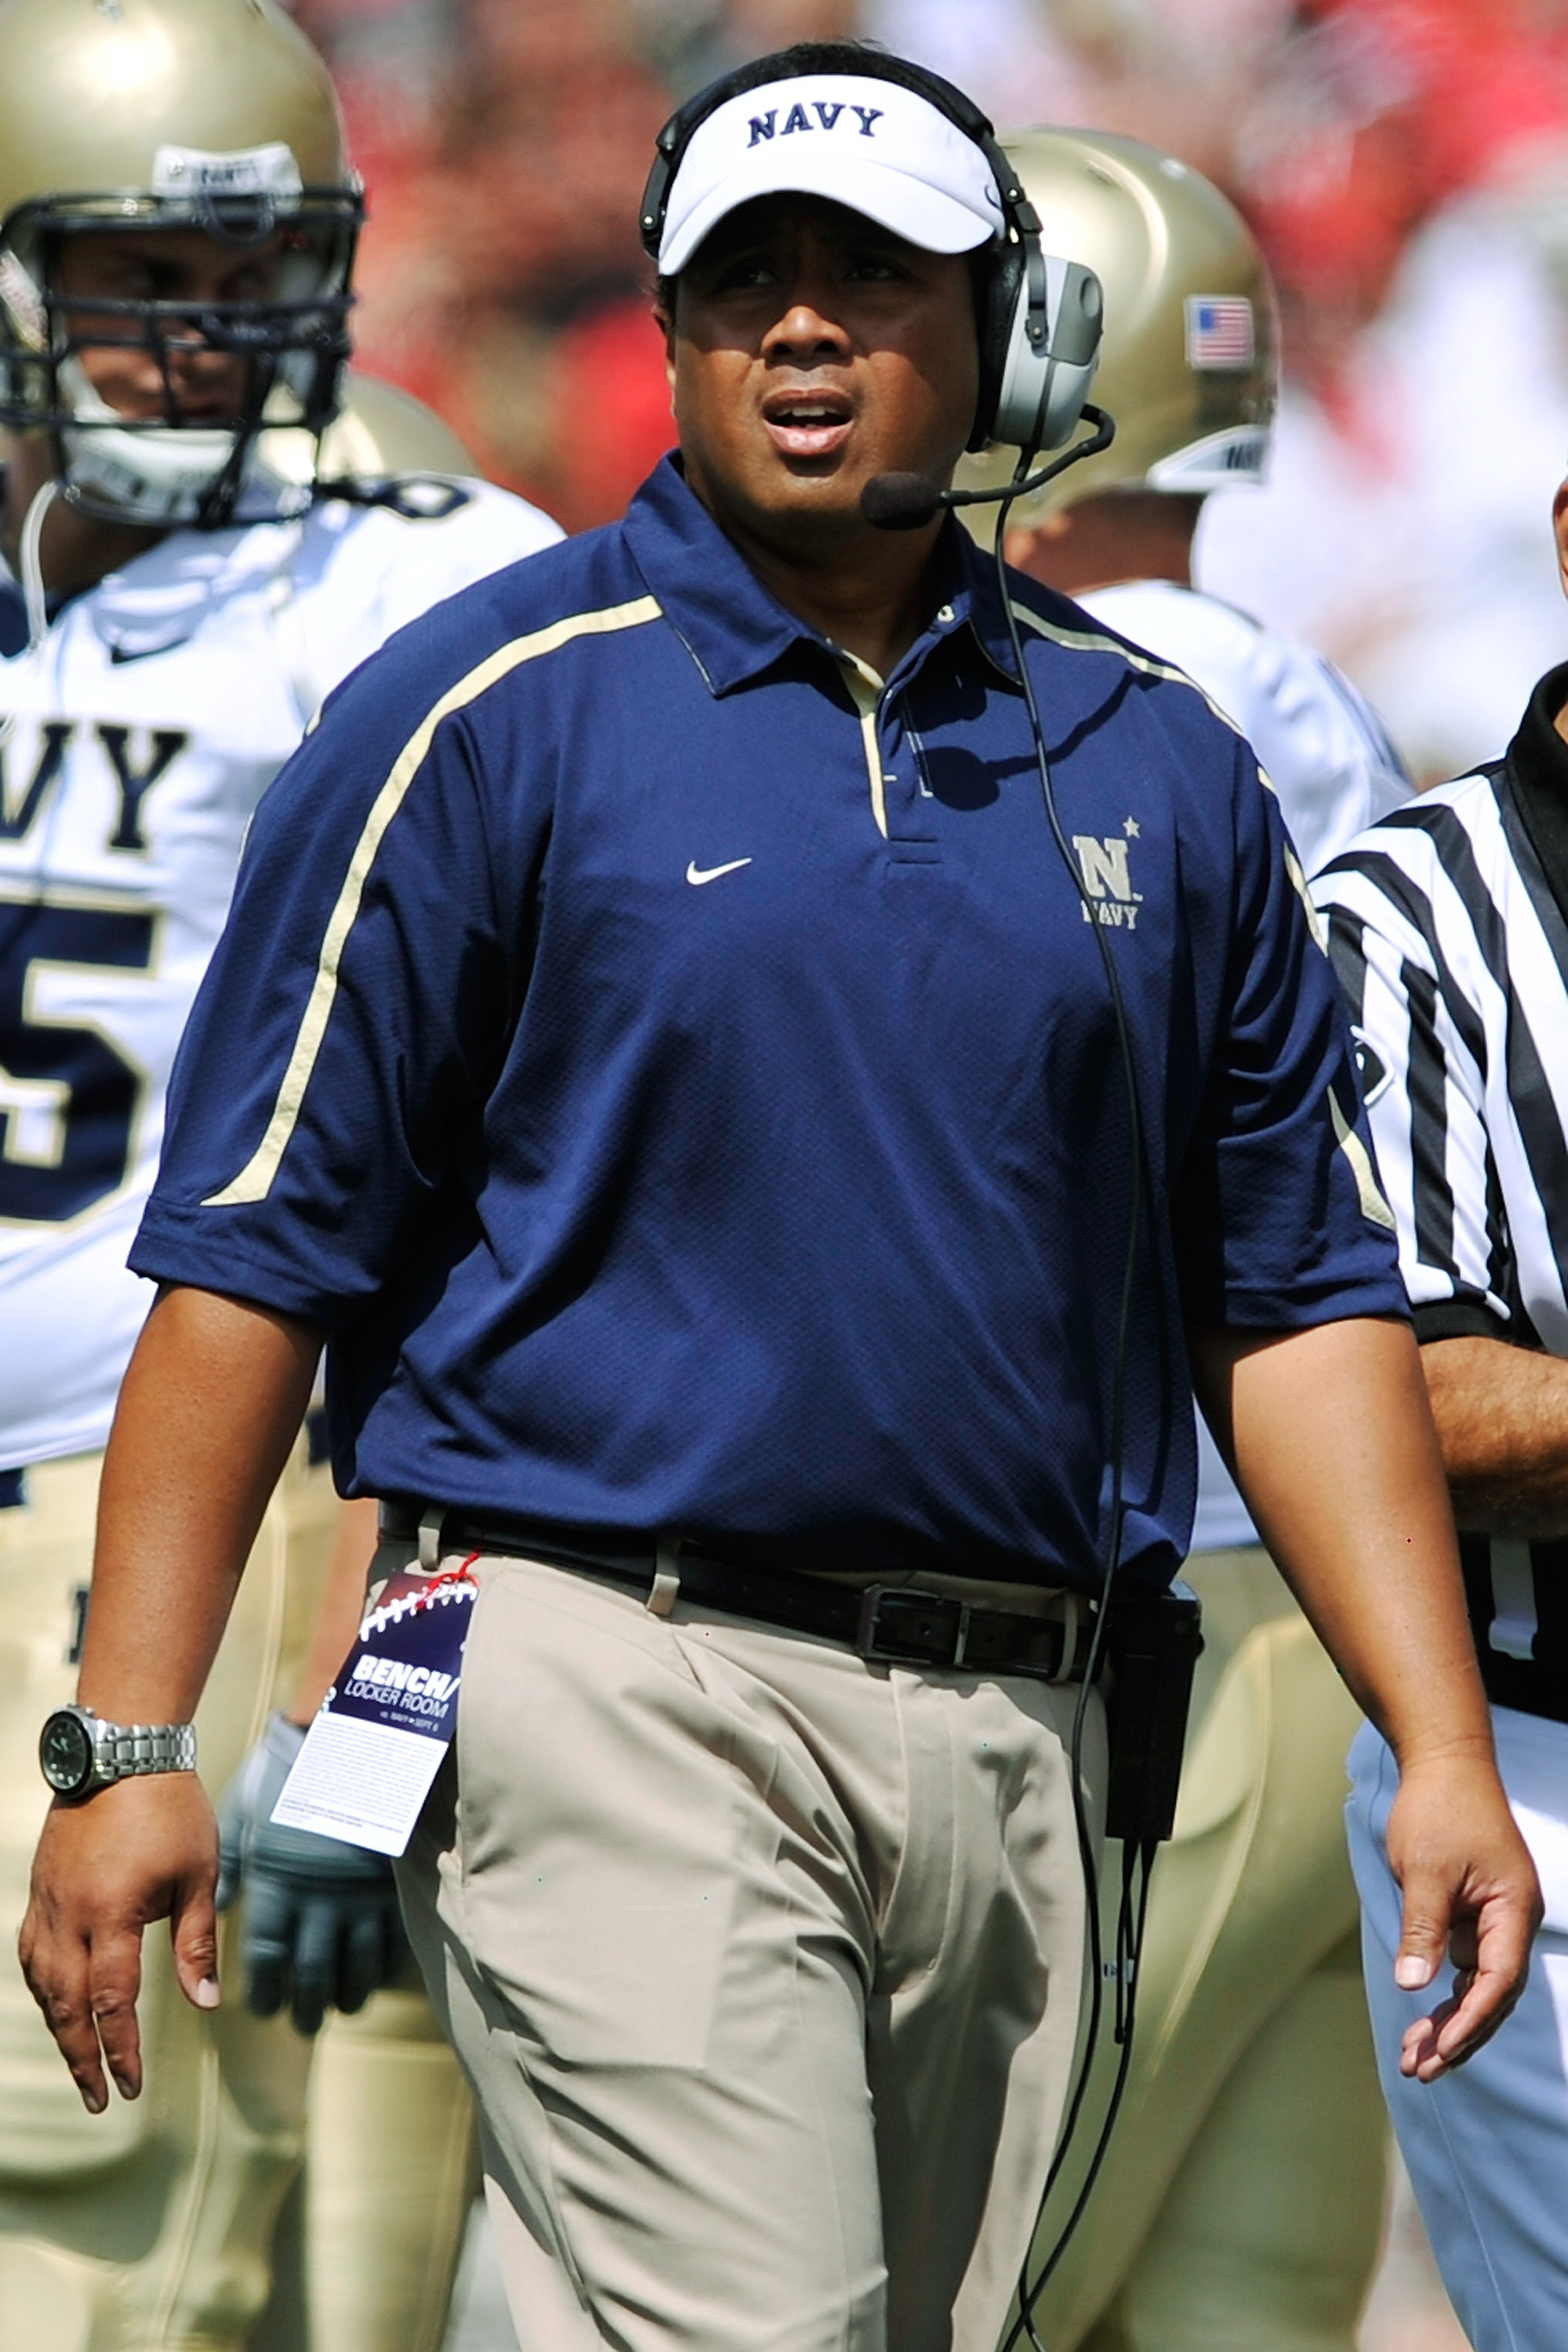 COLUMBUS, OH - SEPTEMBER 05:  Head coach Ken Niumatalolo of the Navy Midshipmen checks the clock during a game against the Ohio State Buckeyes at Ohio Stadium on September 5, 2009 in Columbus, Ohio.  (Photo by Jamie Sabau/Getty Images)